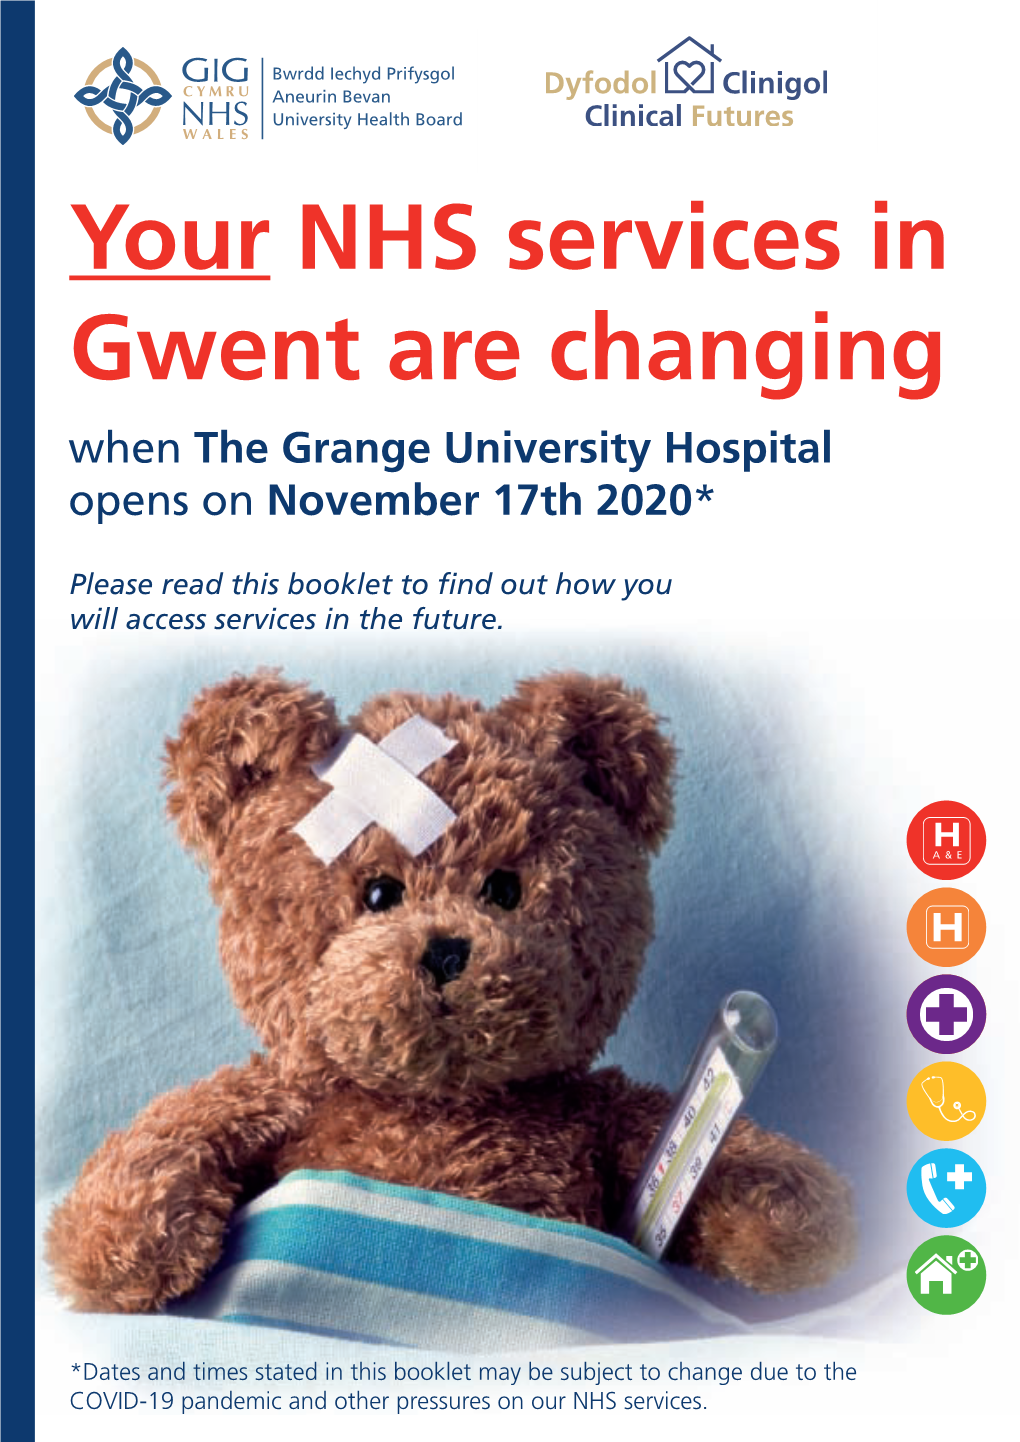 Your NHS Services in Gwent Are Changing When the Grange University Hospital Opens on November 17Th 2020 *